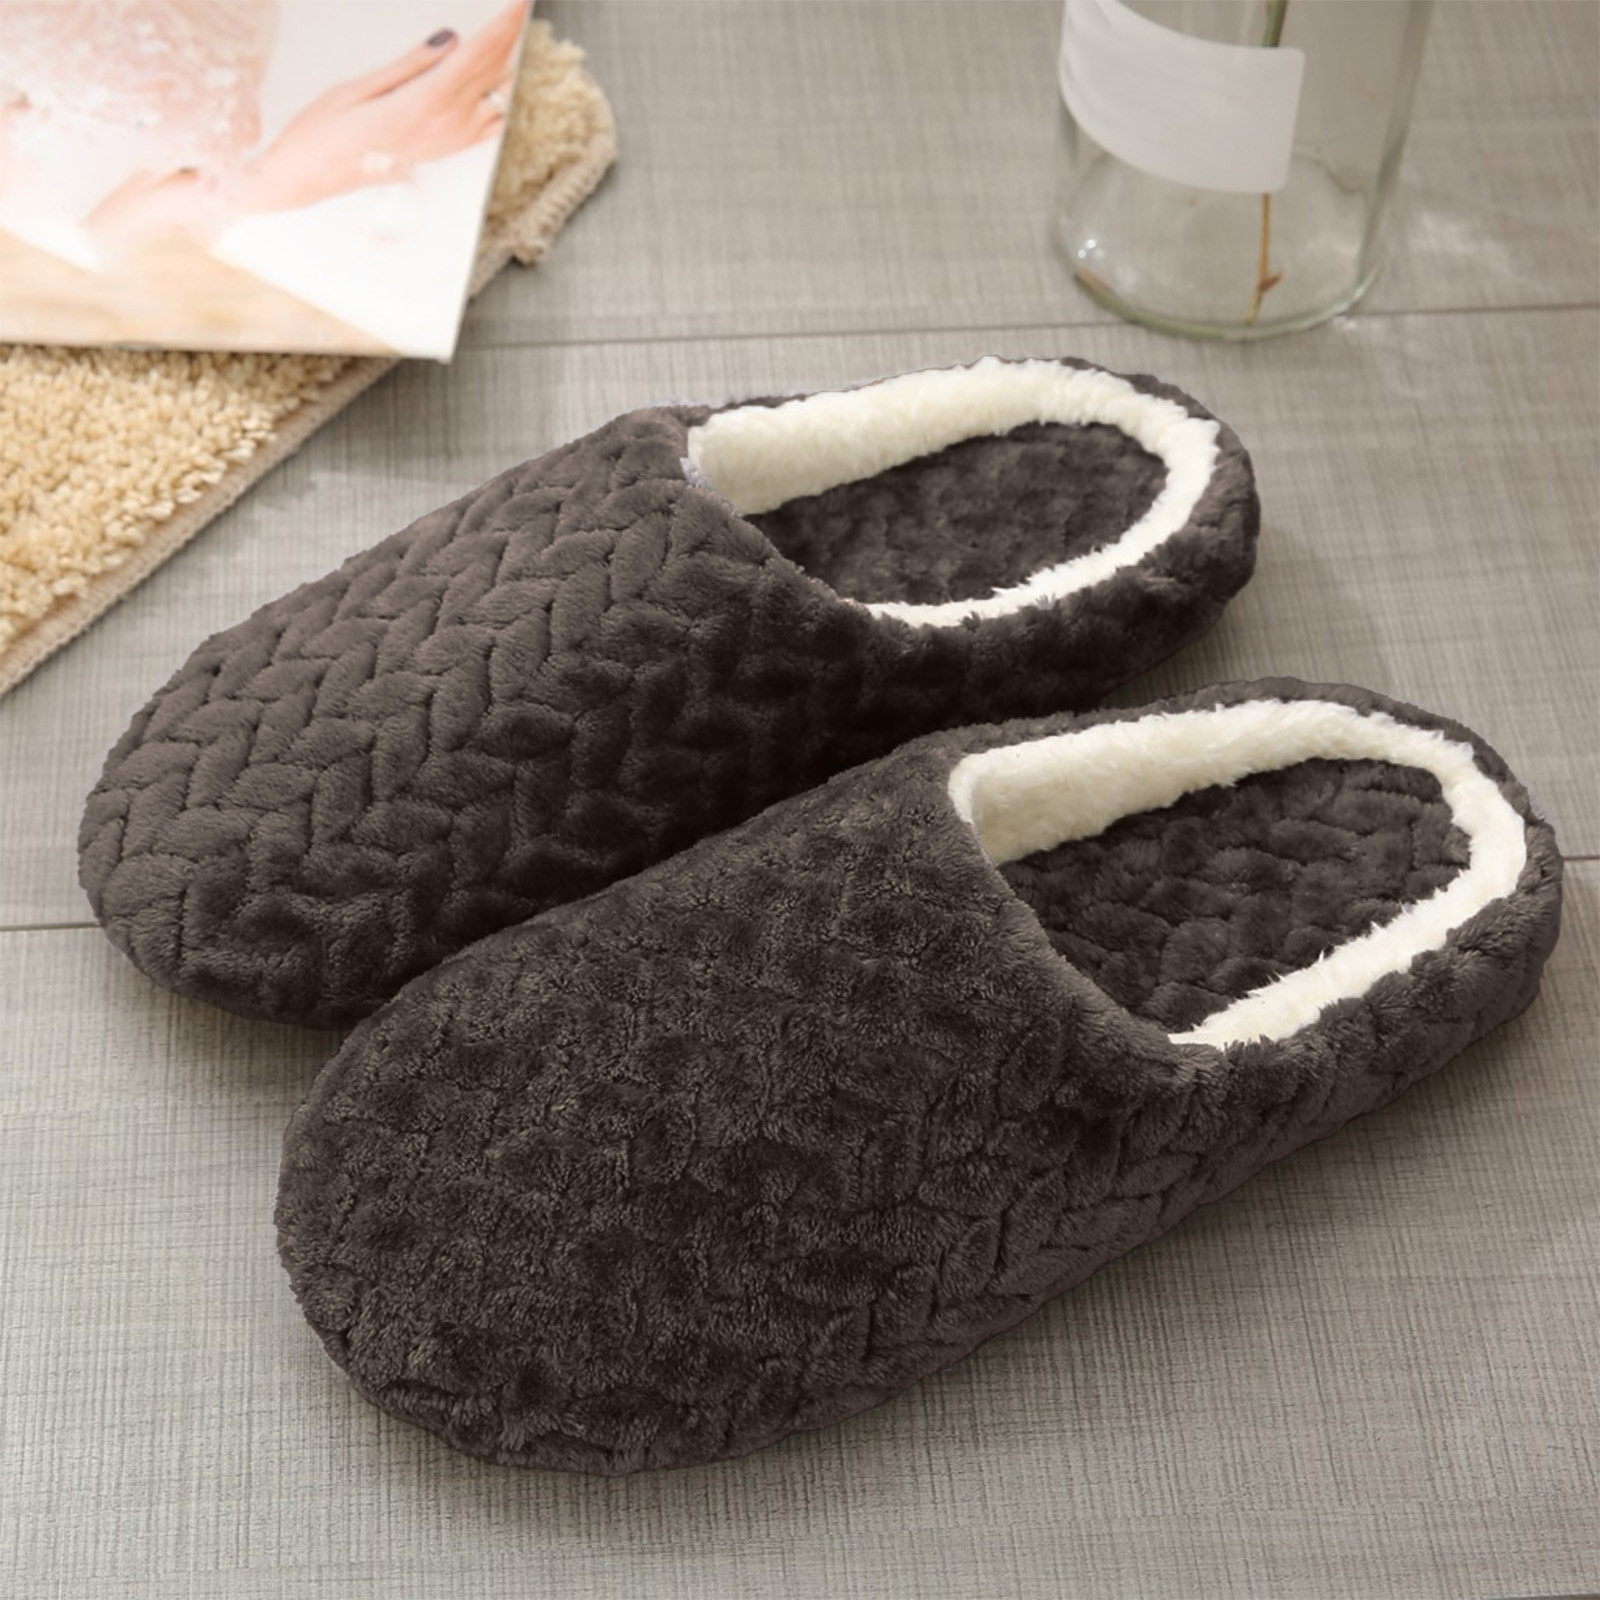 Aueoeo House Slippers with Arch Support, Women's Soft Memory Foam ...